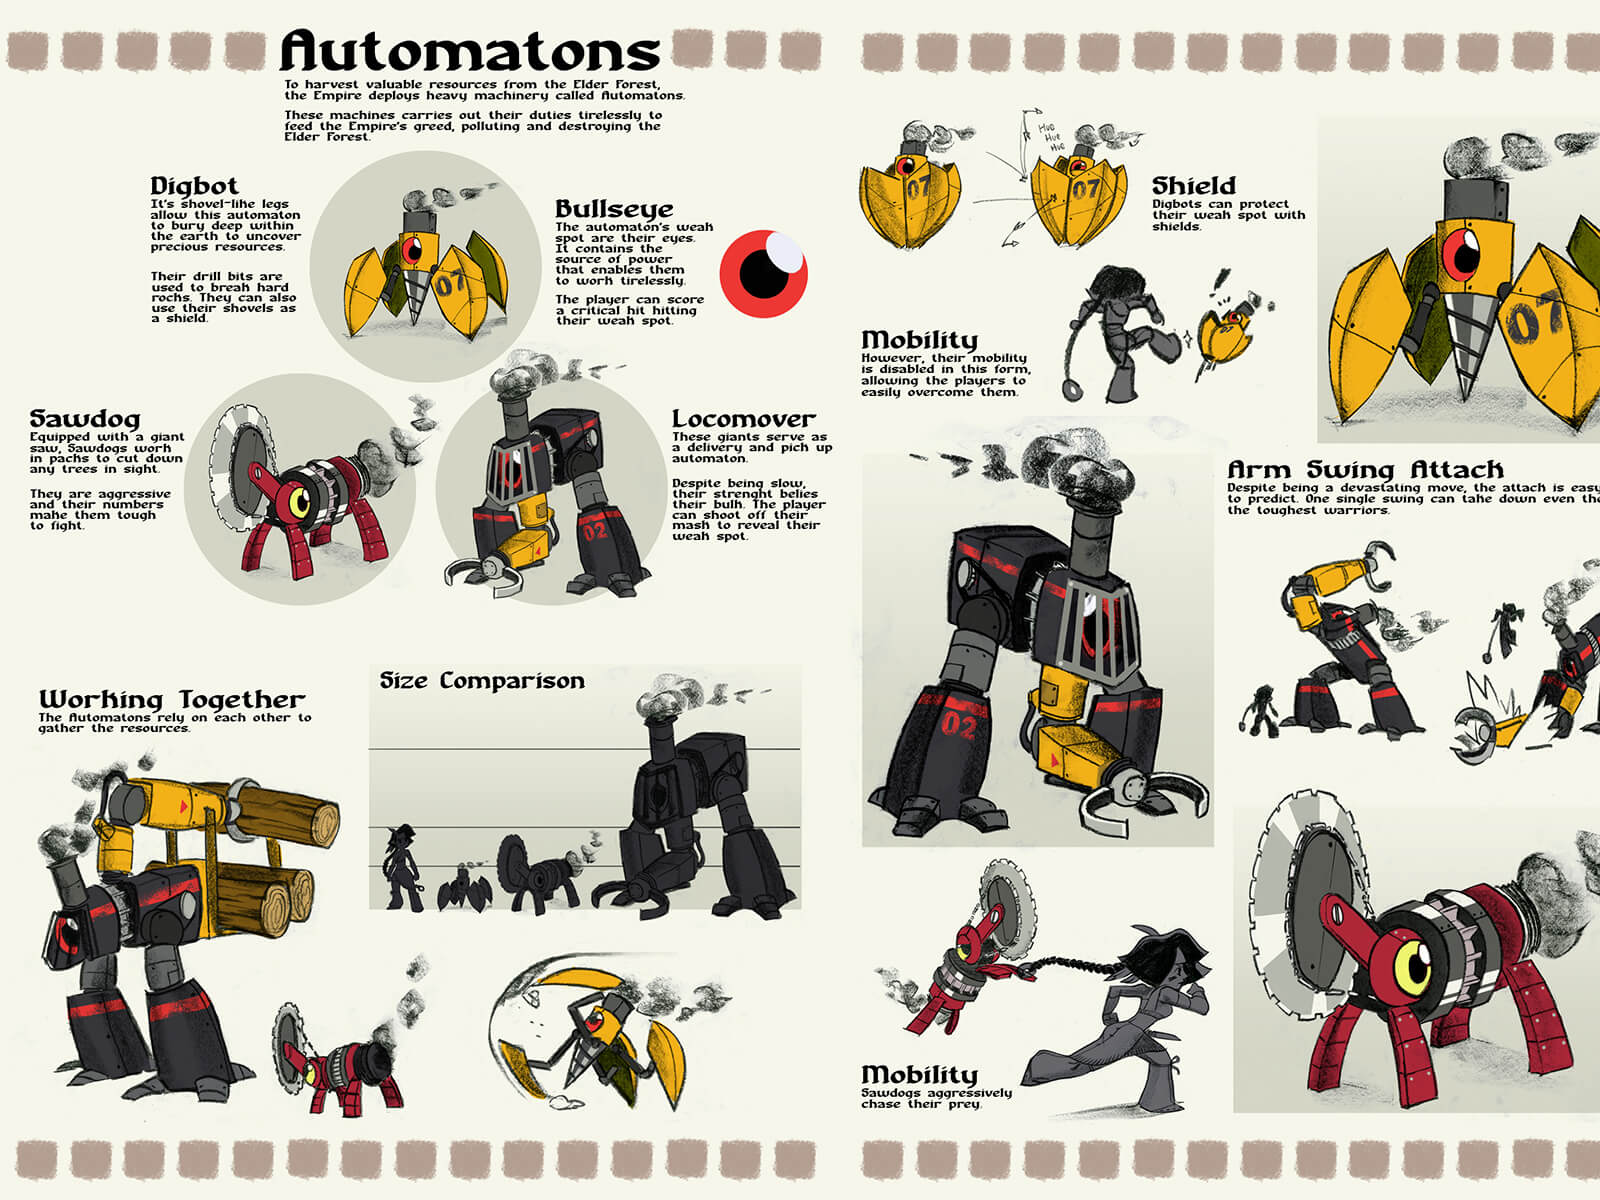 Sketches and details of three robots, resembling a drill, buzz saw, and train in various attack poses.